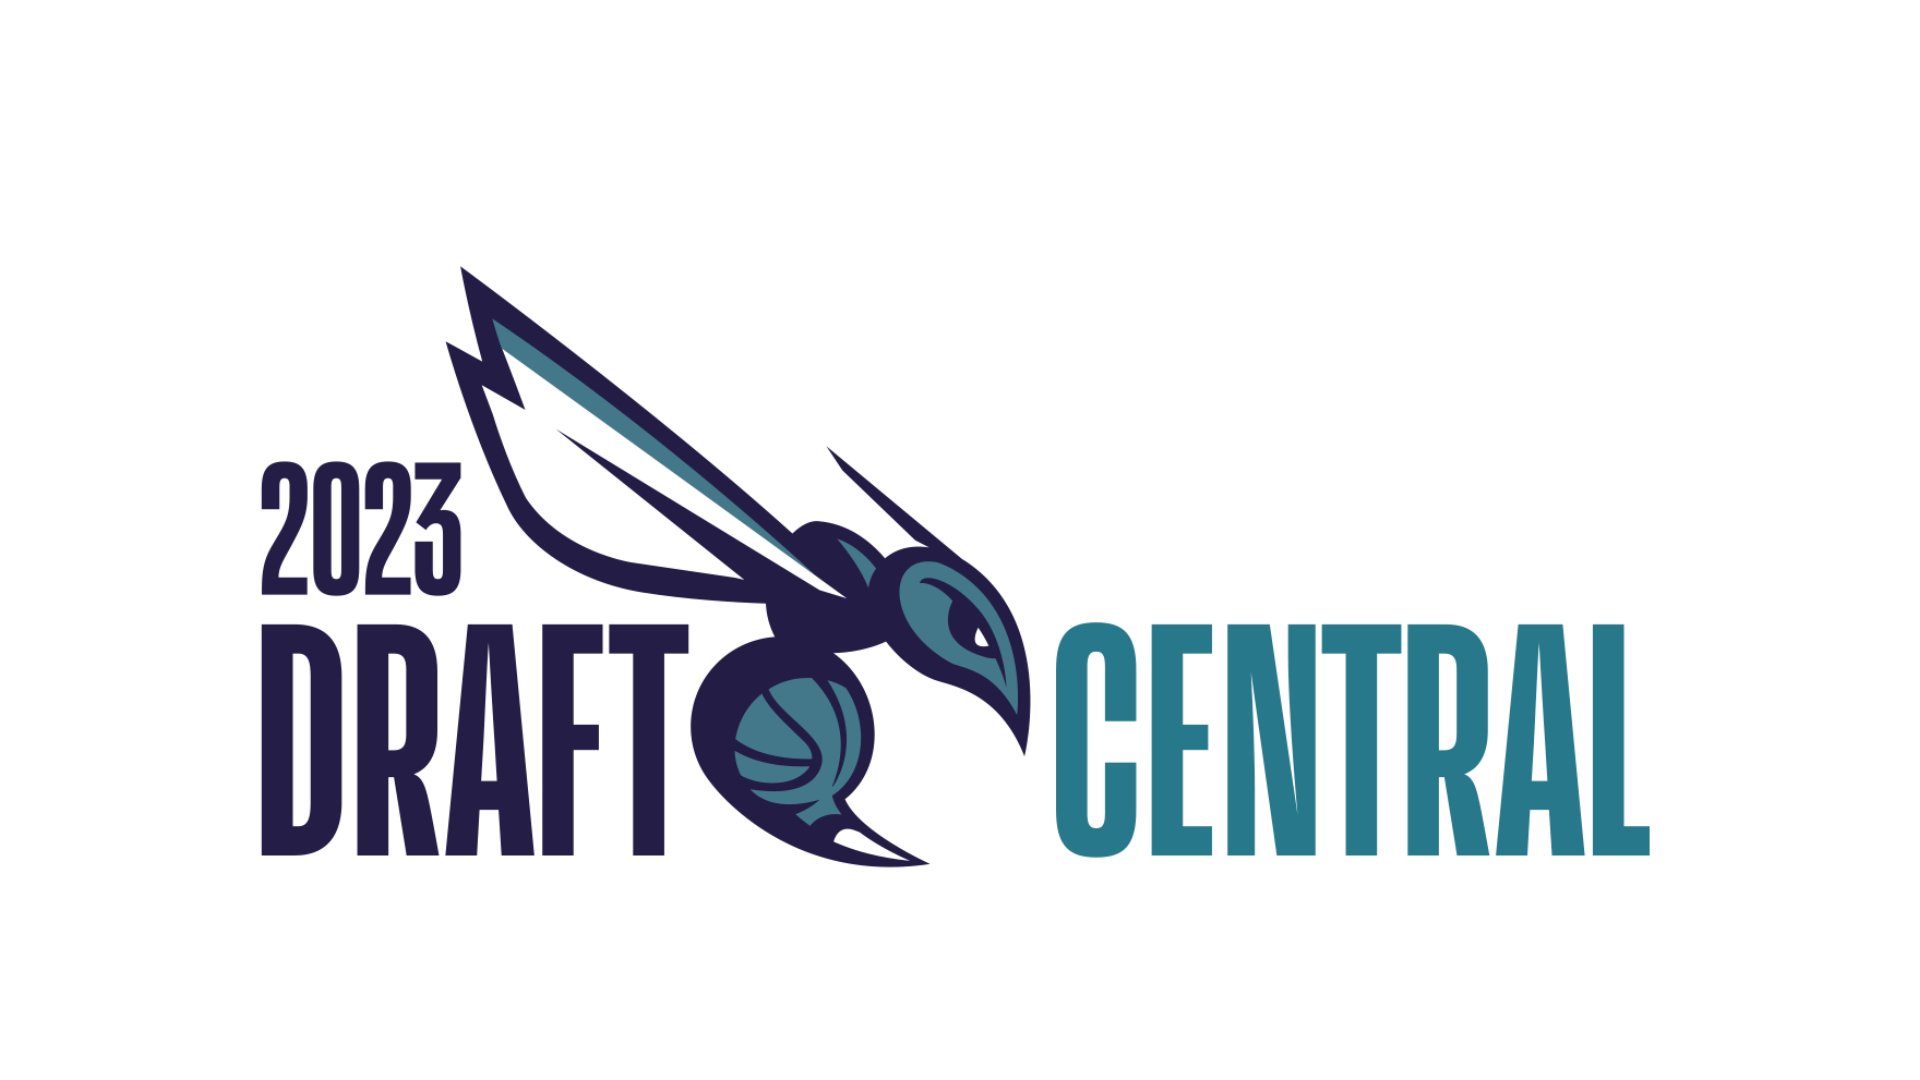 draft central